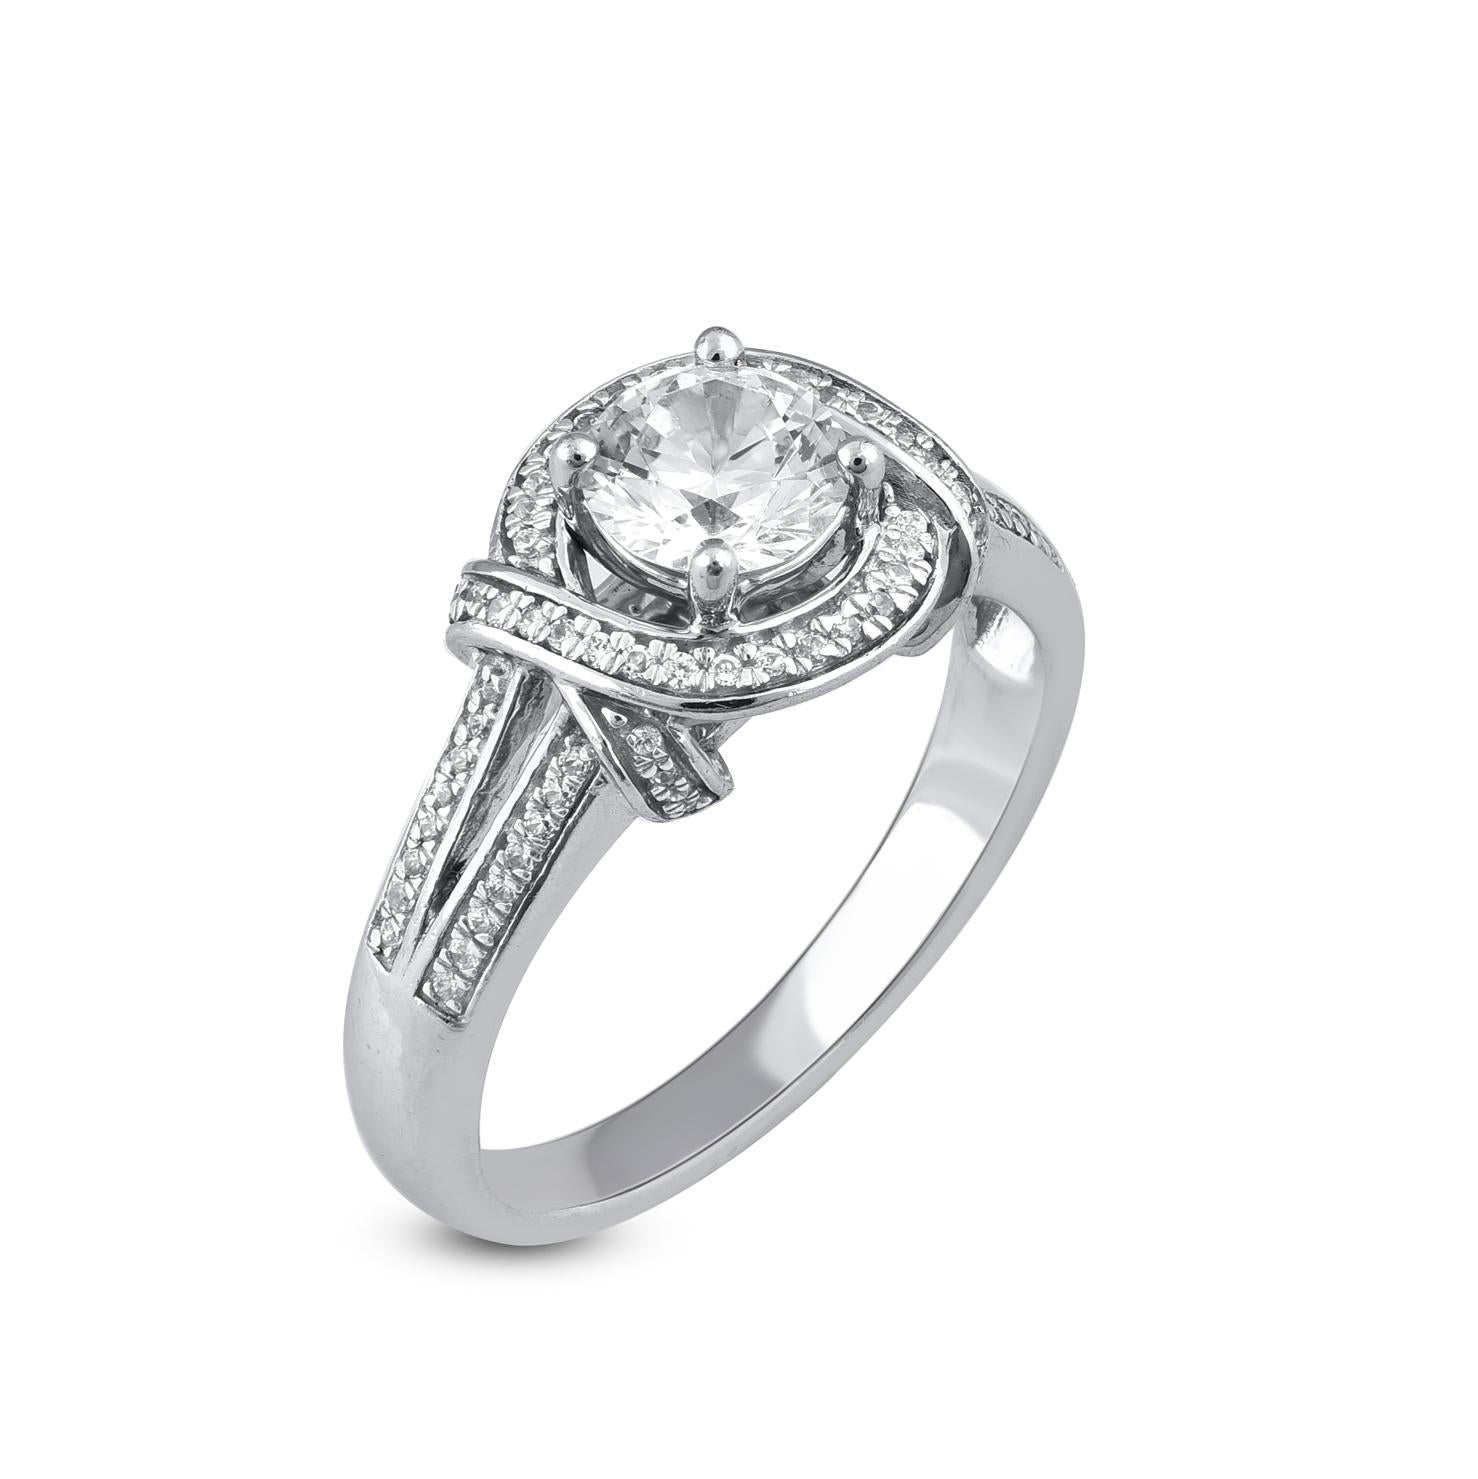 An Elegant Statement Of Style, This Diamond Engagement Ring With Love Knot Shank Design Showcases 0.82ct of center stone and  0.18ct of small round Diamonds Beautifully set in prong and channel setting. Shines with G-H colour and SI1 clarity. 